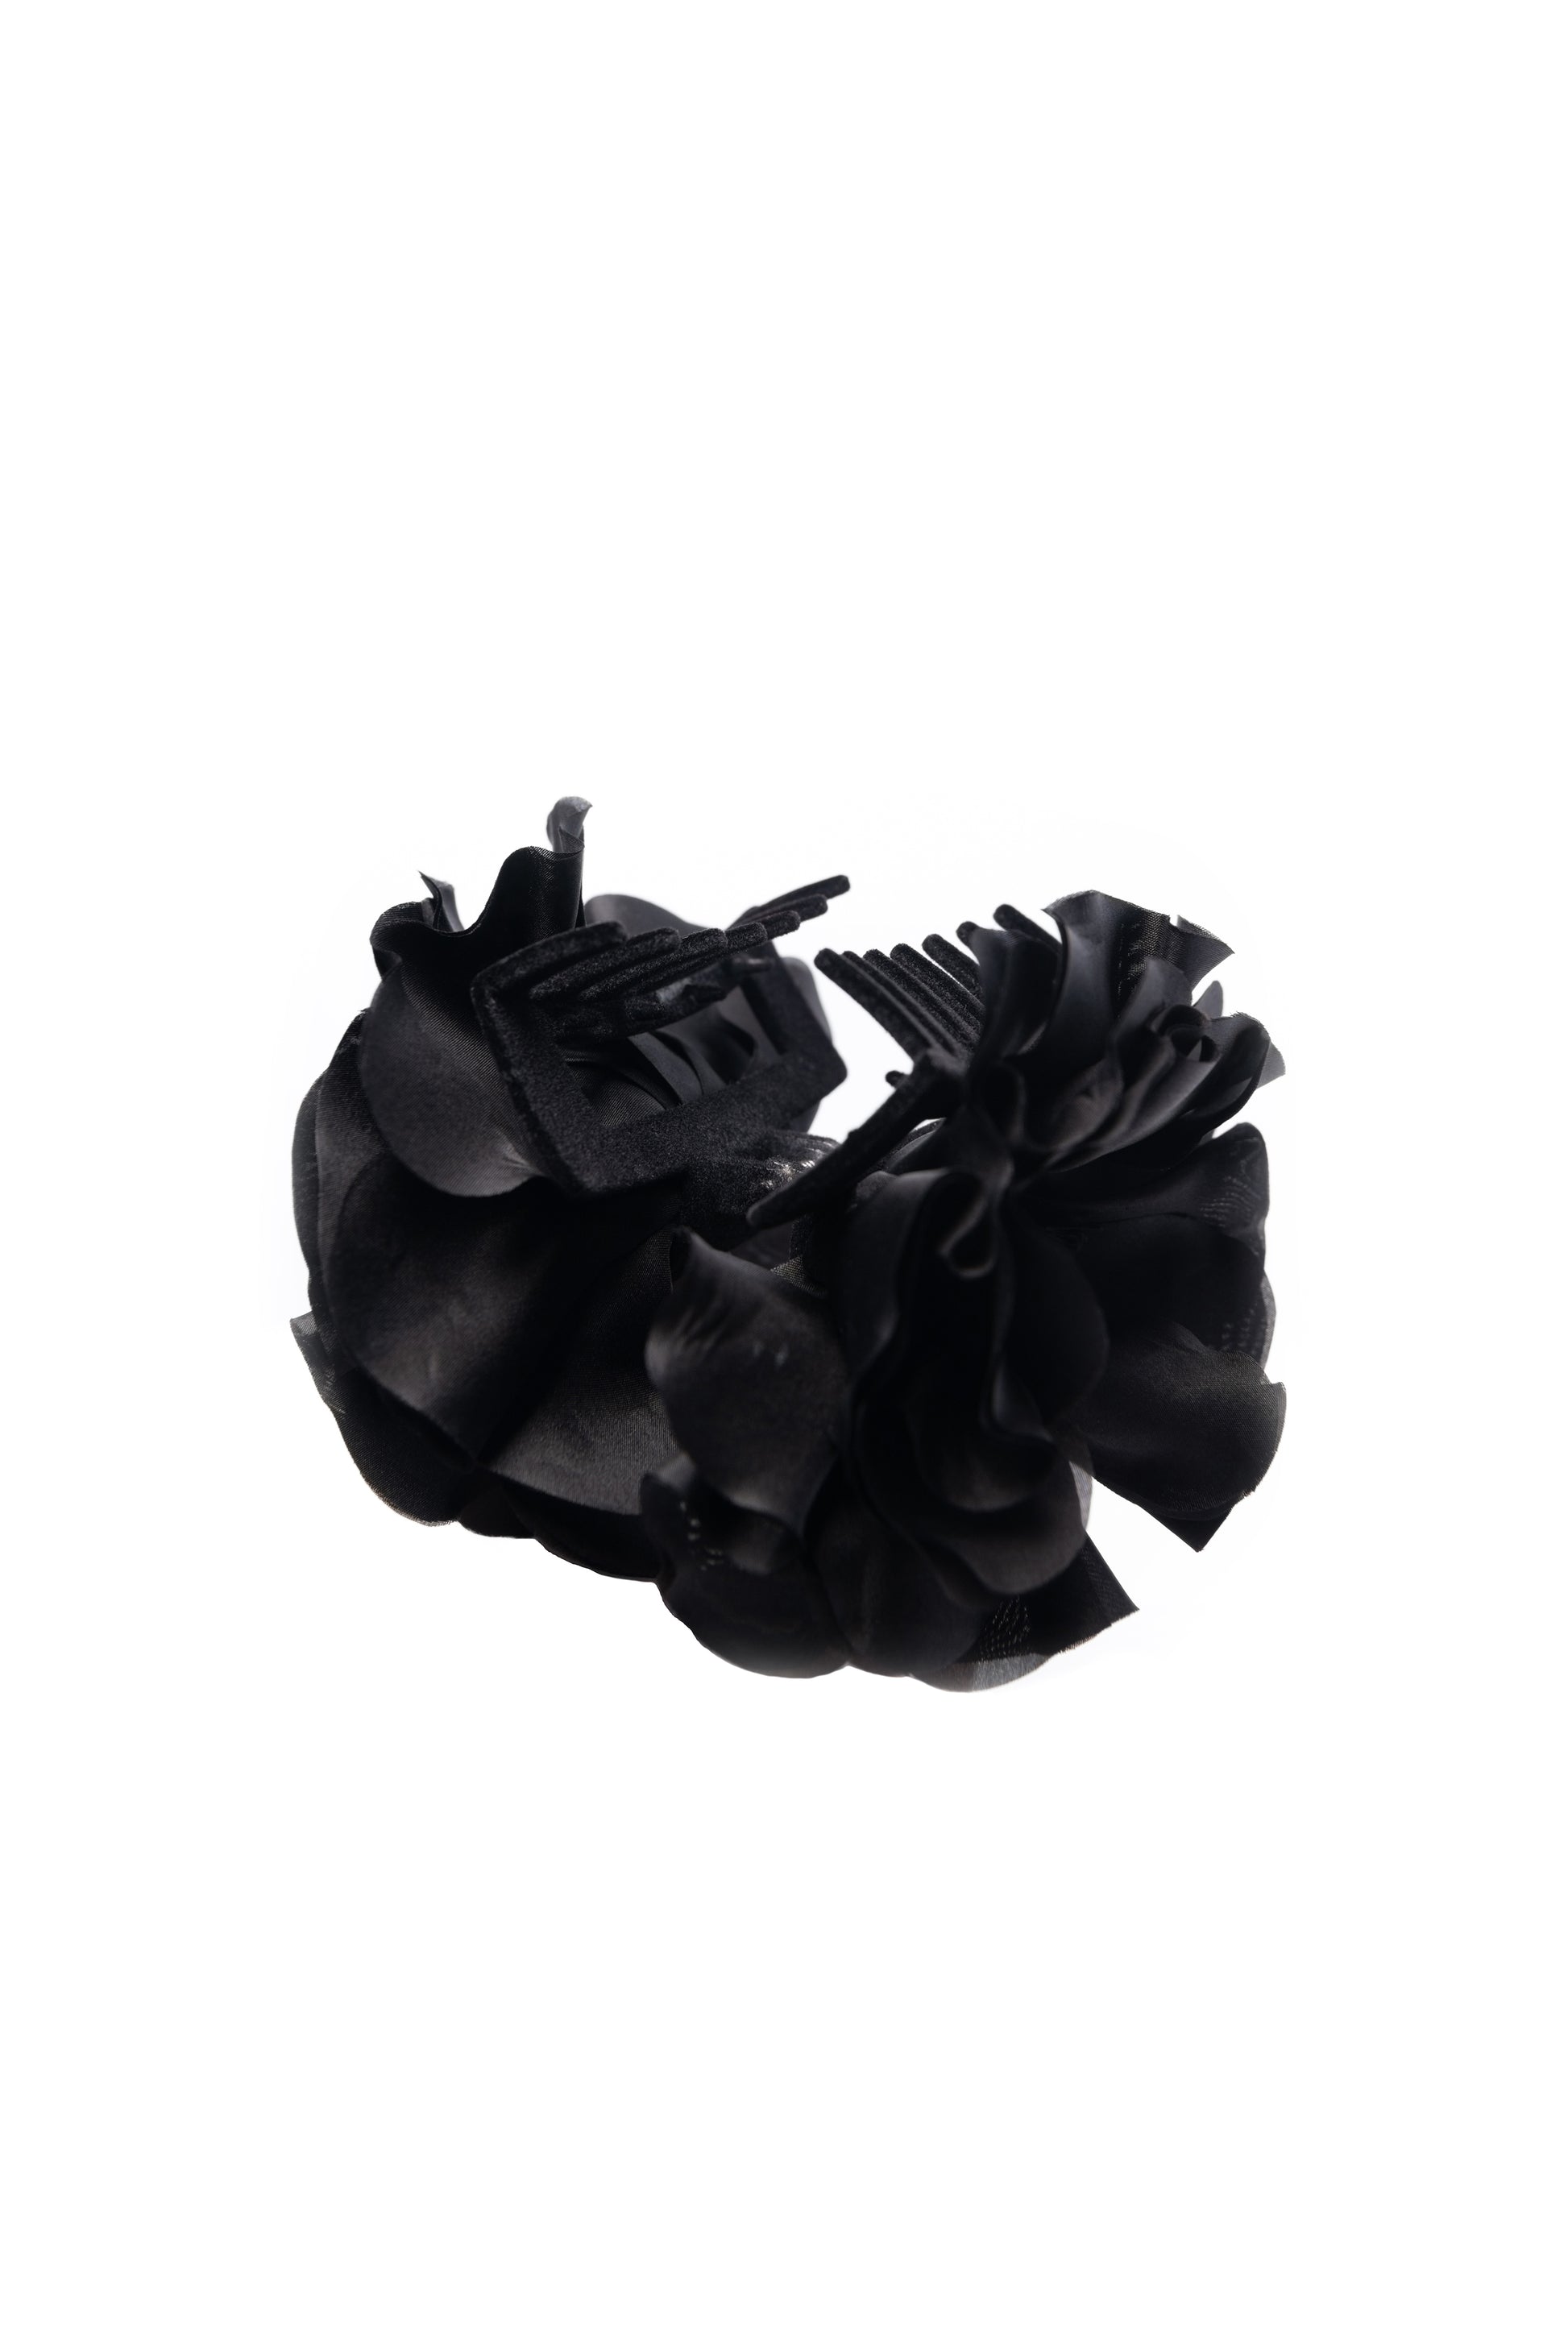 The Irish Twin - Anemone flower claw clip for hair - black Silk fabric - Made in France - Made in Paris - Handmade in Paris - Designed in Paris - Handcrafted - Be my Guest - Made to love and to last - Unique piece made by hand - original and special for Host Wear by The Irish Twin - created by Jill Bauwens